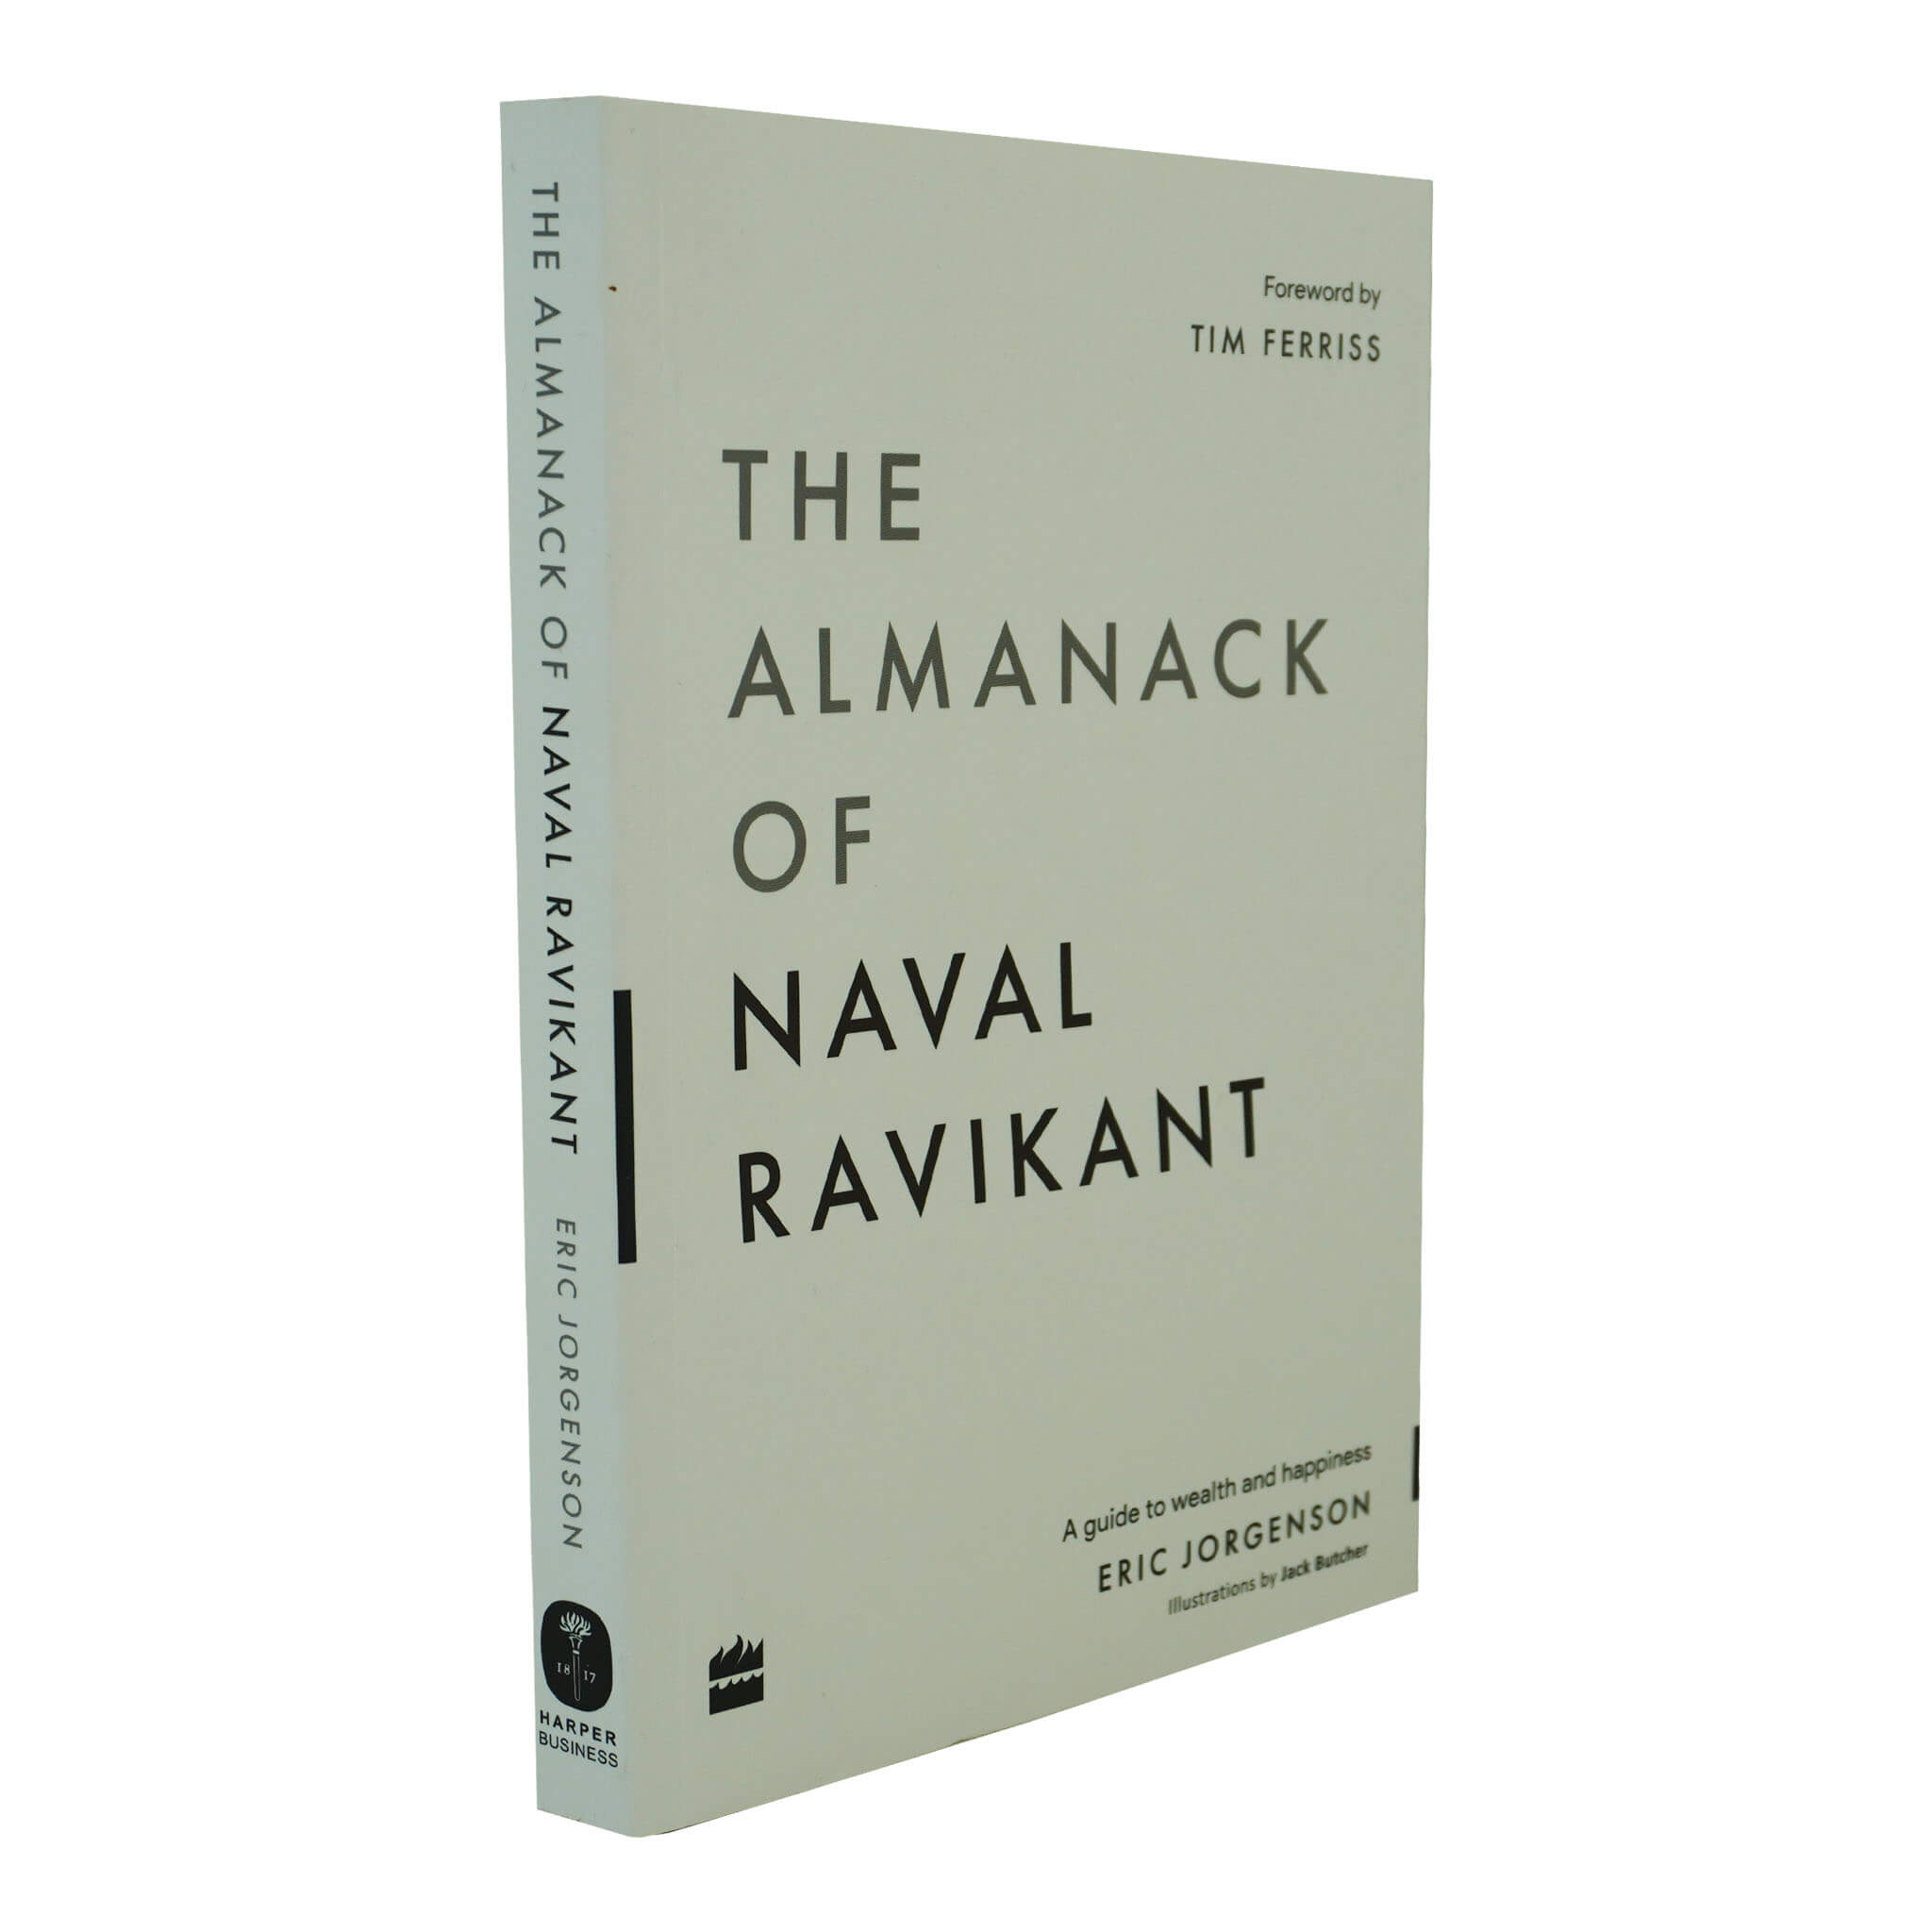 The Almanack of Naval Ravikant: A Guide to Wealth and Happiness By